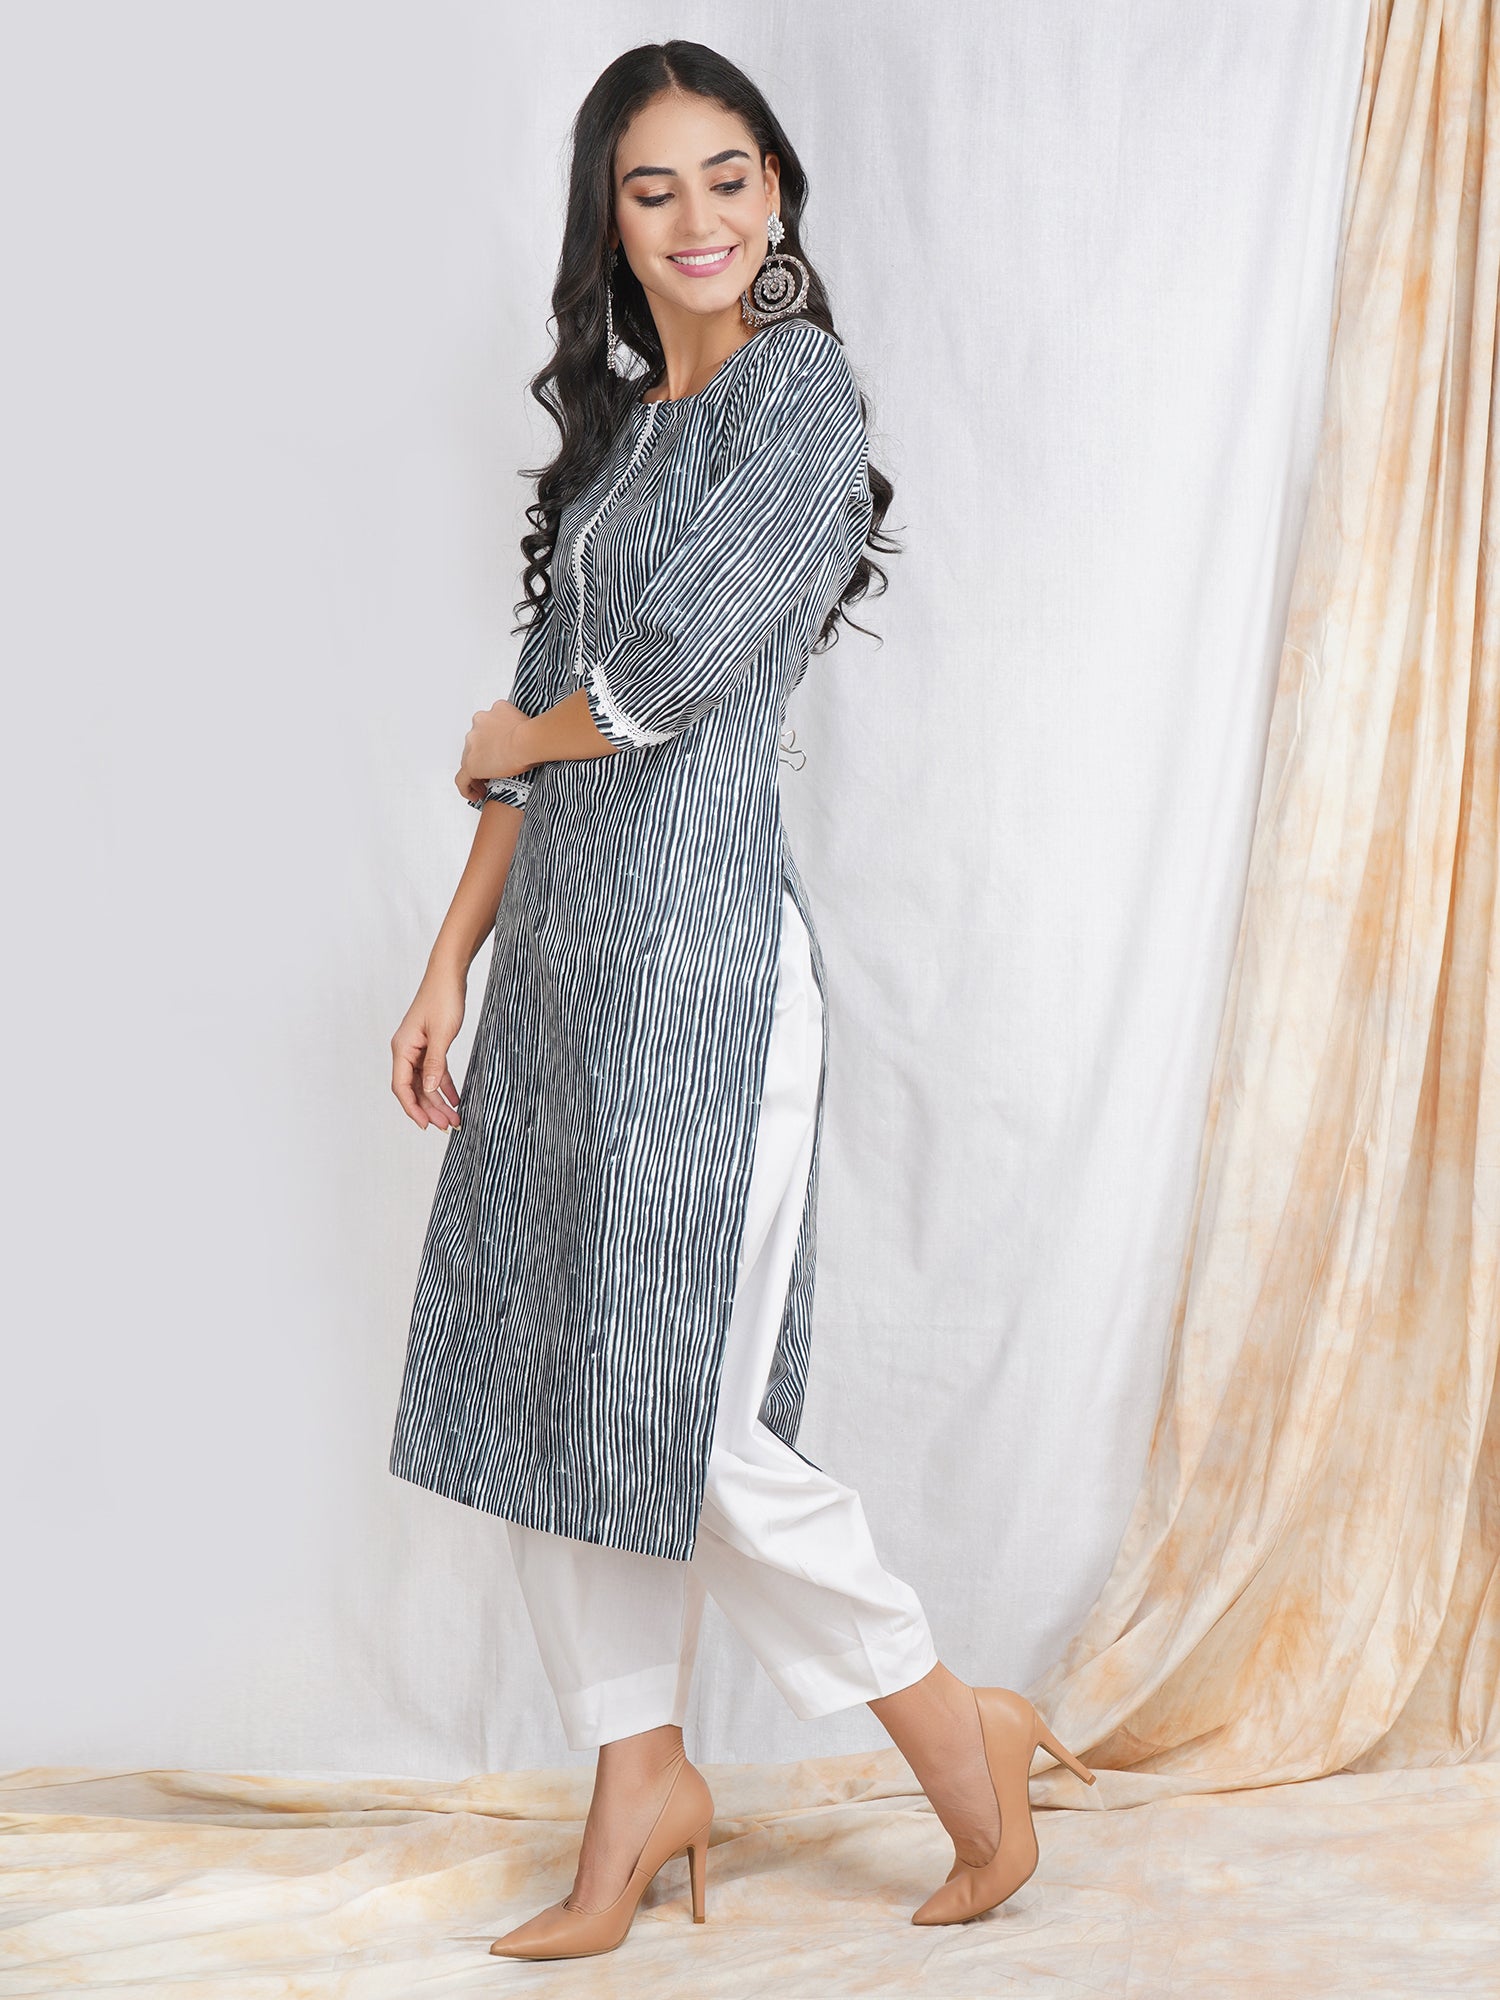 Buy Latest Kurtis for Women in India at Best Price | Taneira